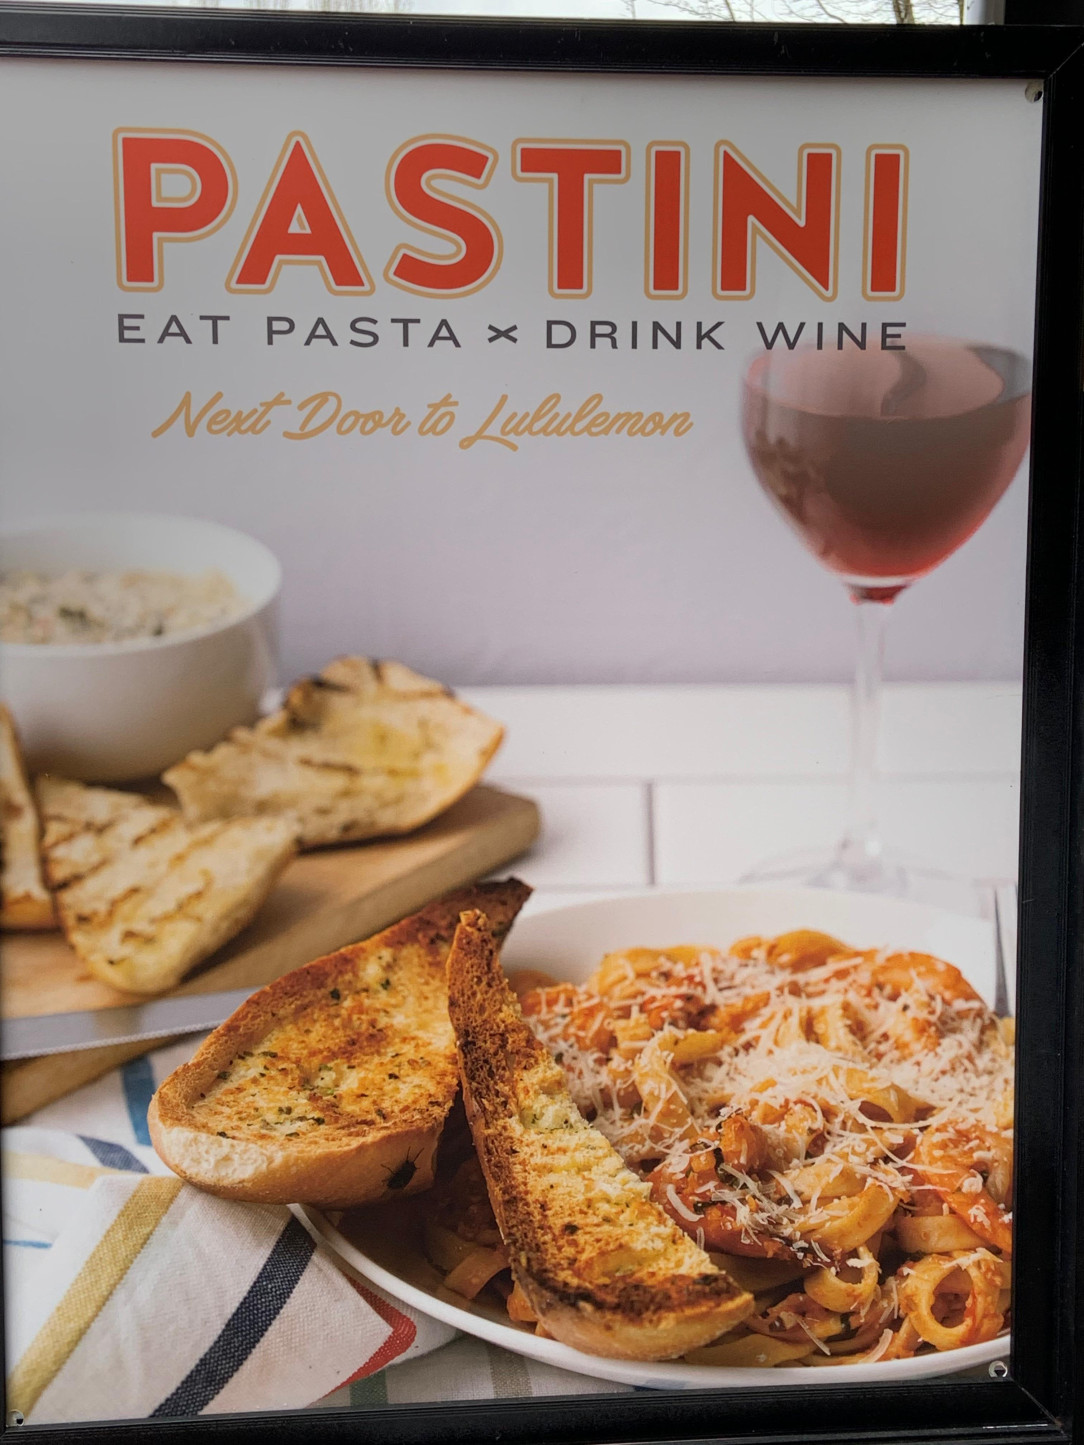 This Pastini advertisement’s picture has a fly on the garlic bread